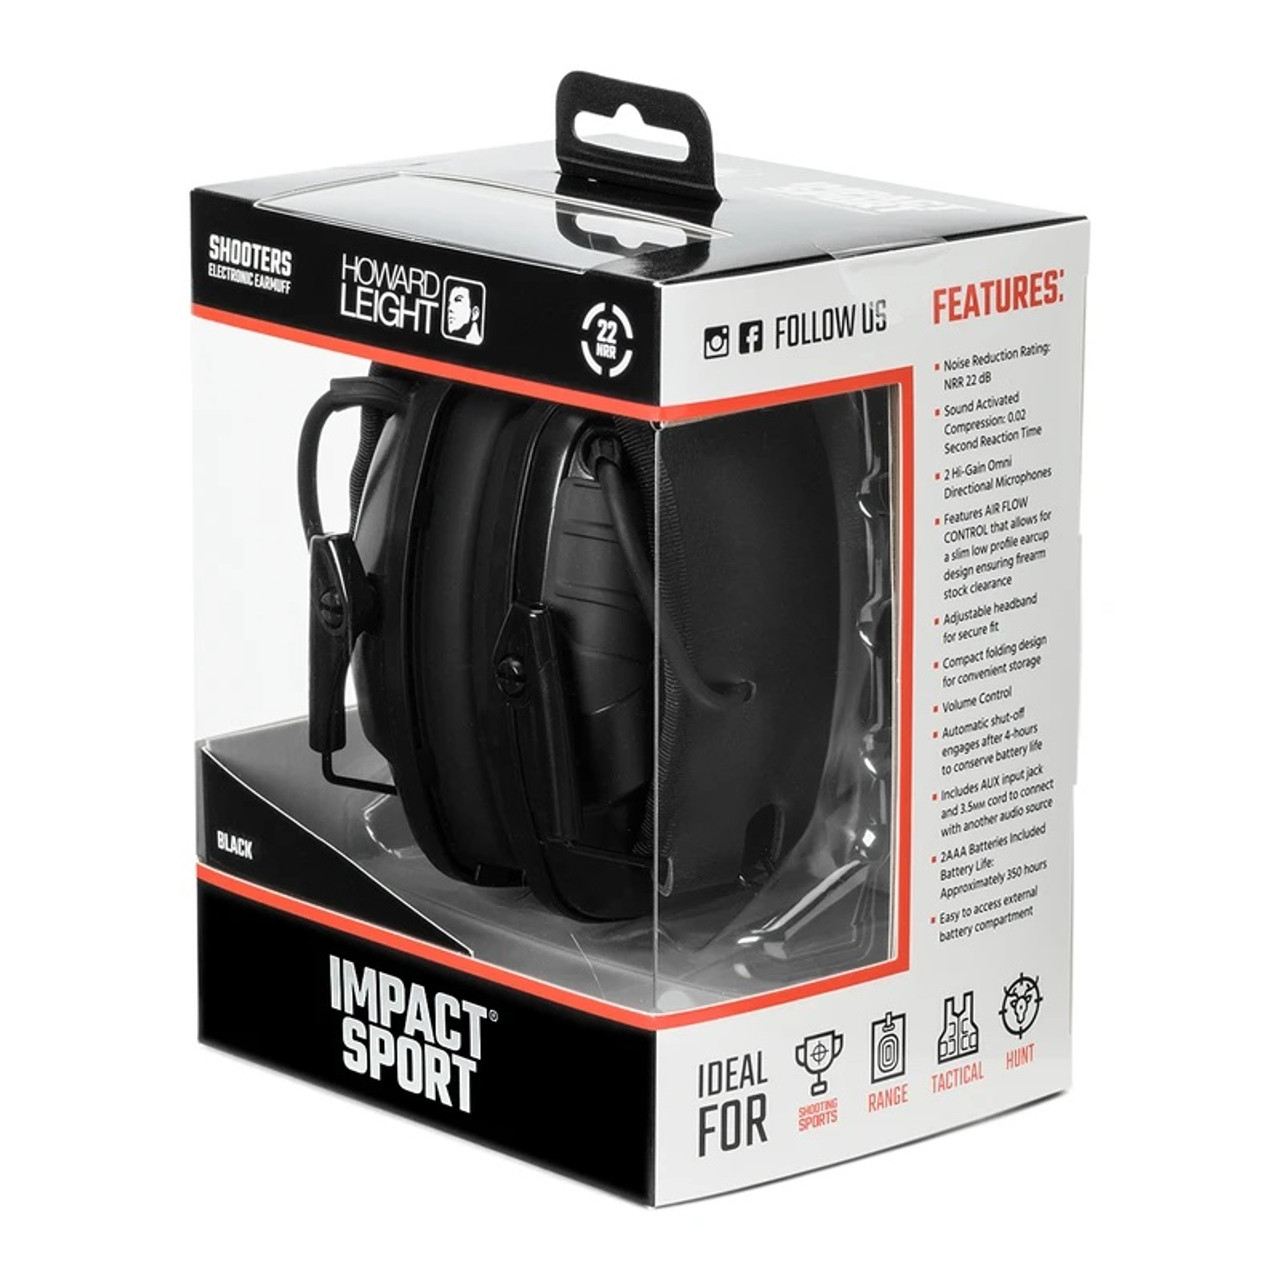 Howard Leight Impact Sport Shooters Electronic Earmuff R-02524 22 NRR